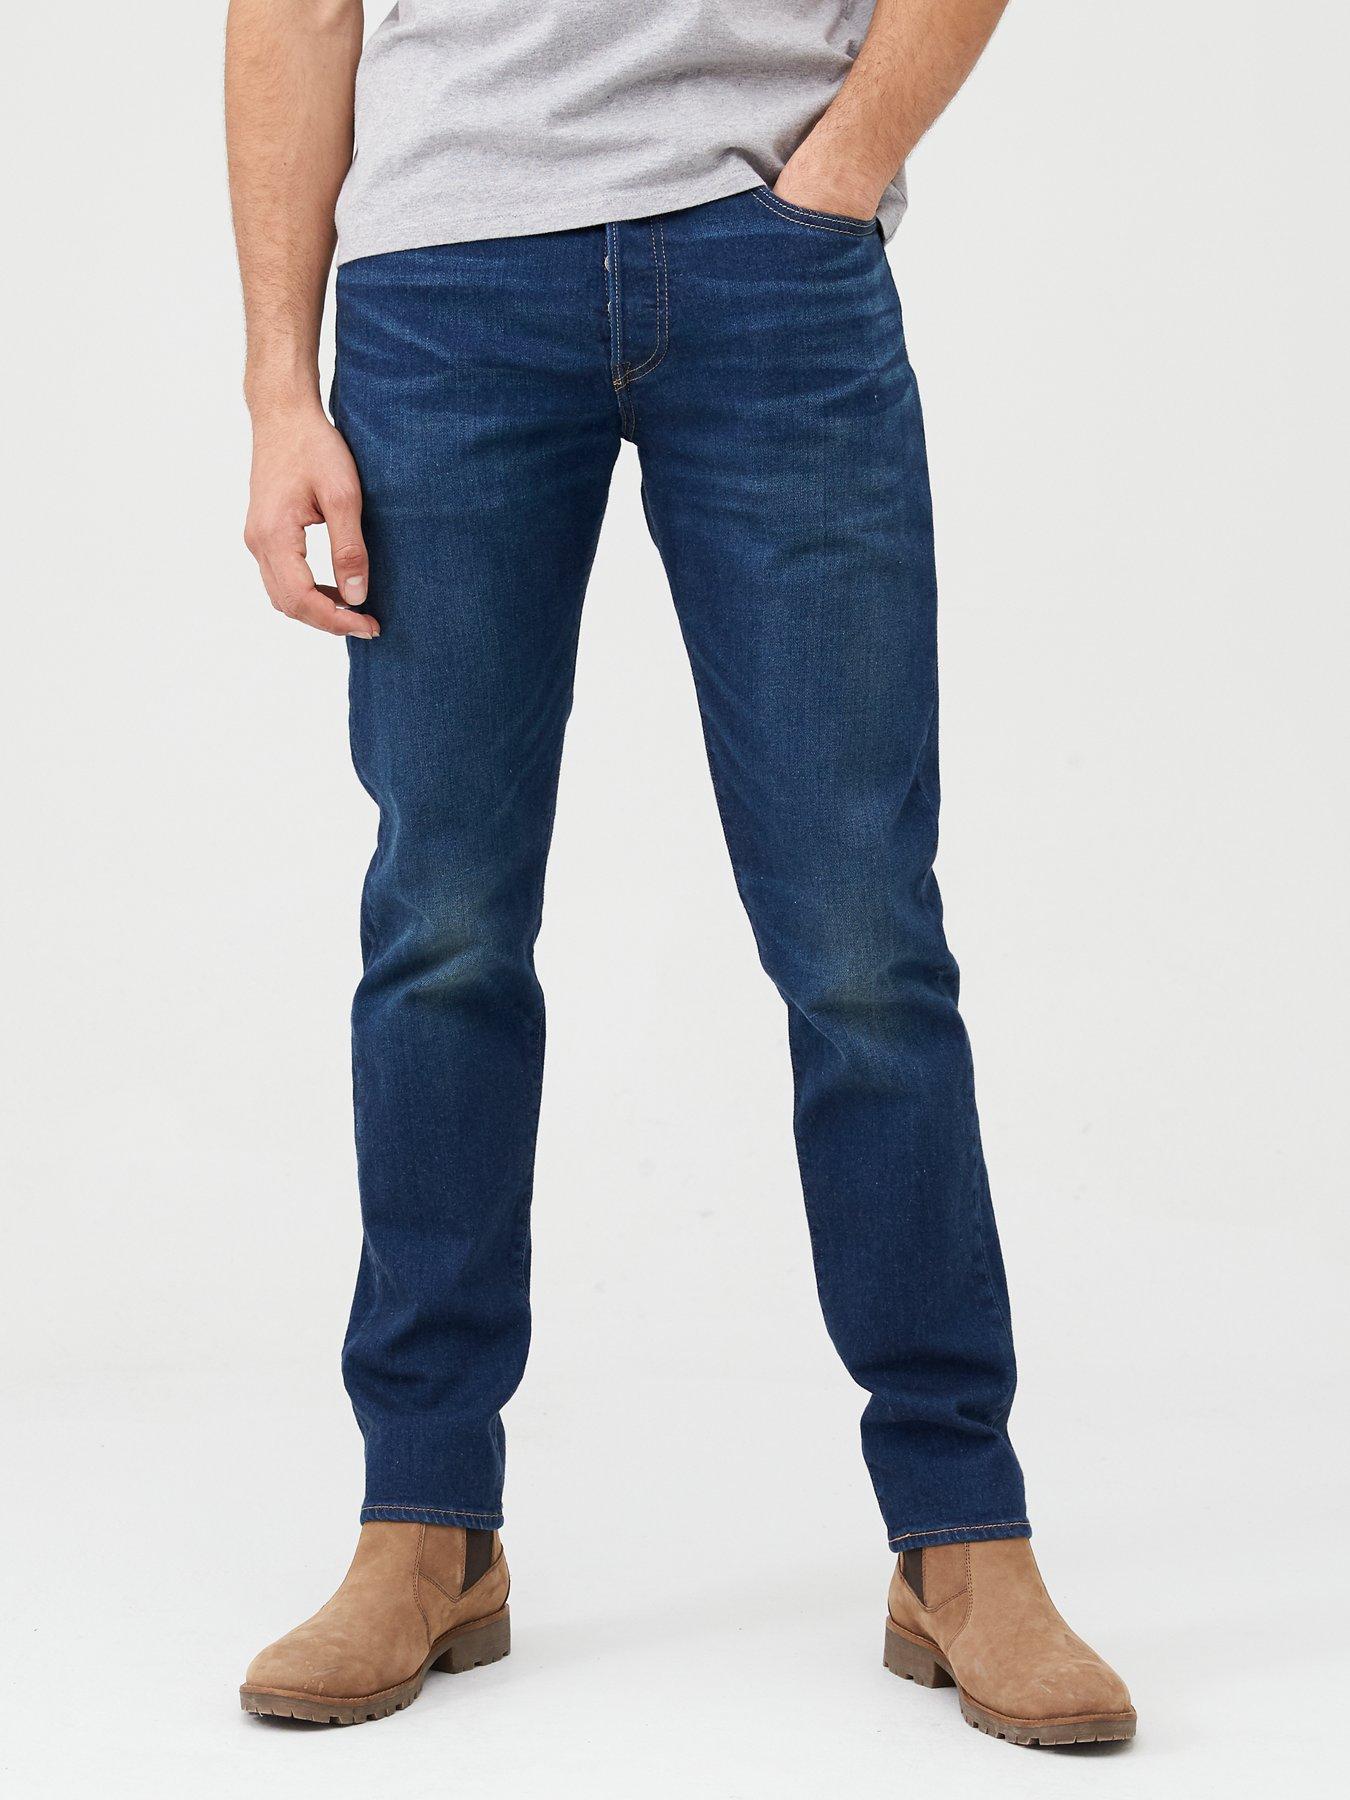 jeans tapered fit meaning